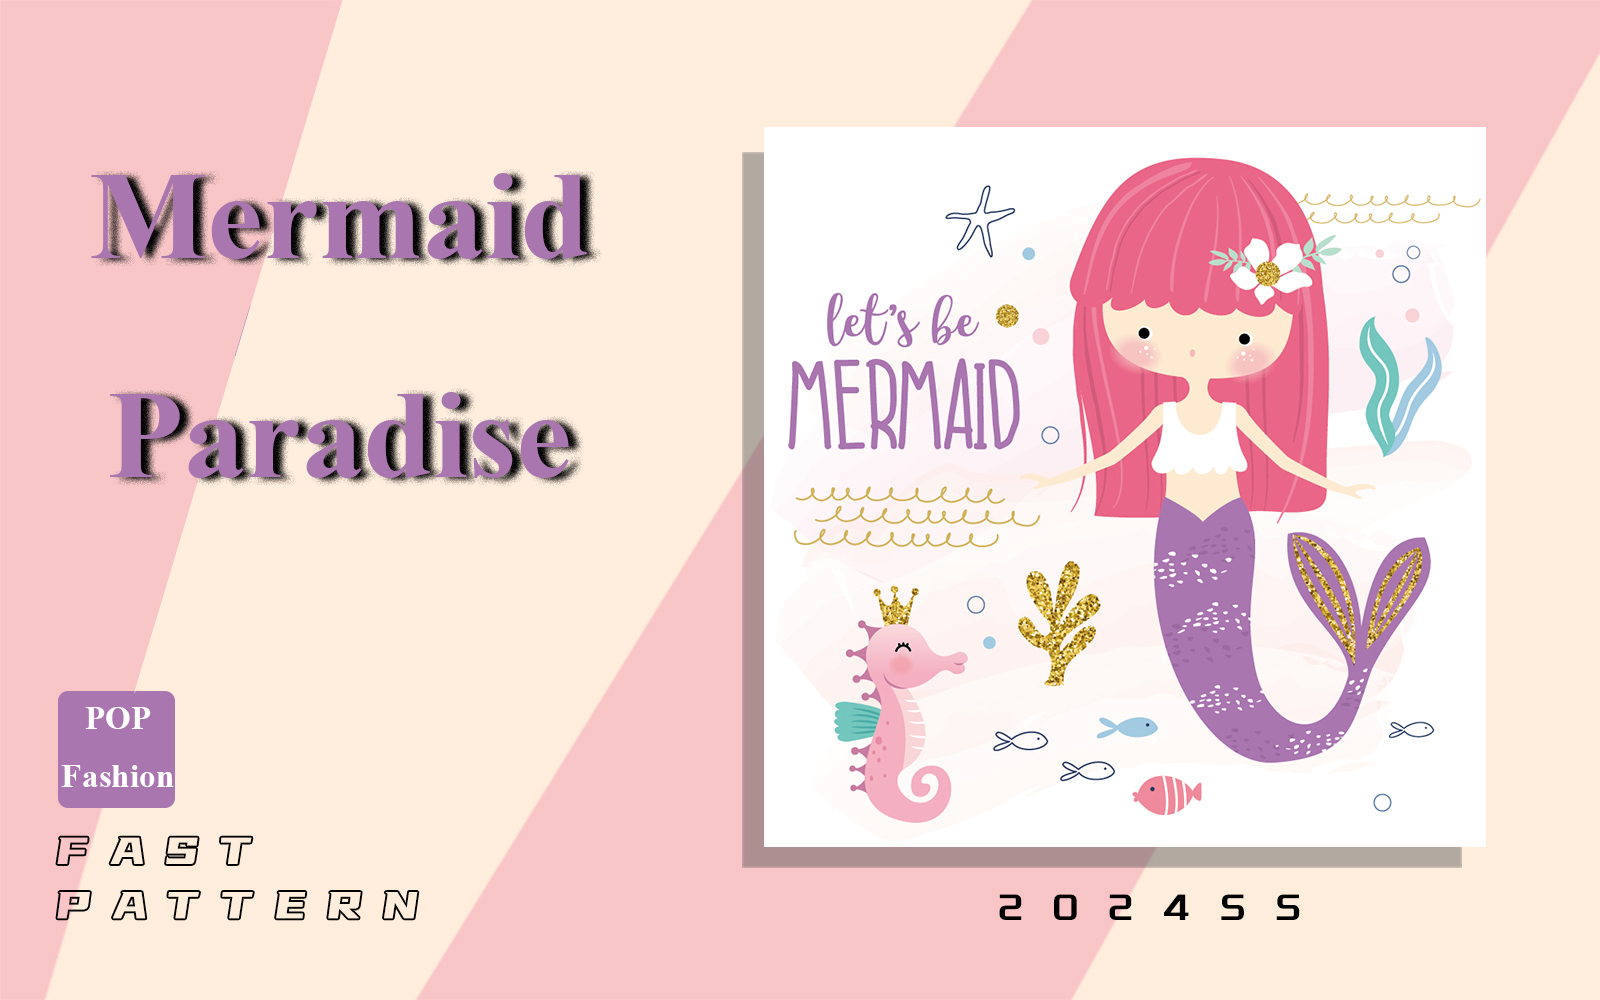 Mermaid Paradise -- The Fast-response Pattern Trend for Kidswear